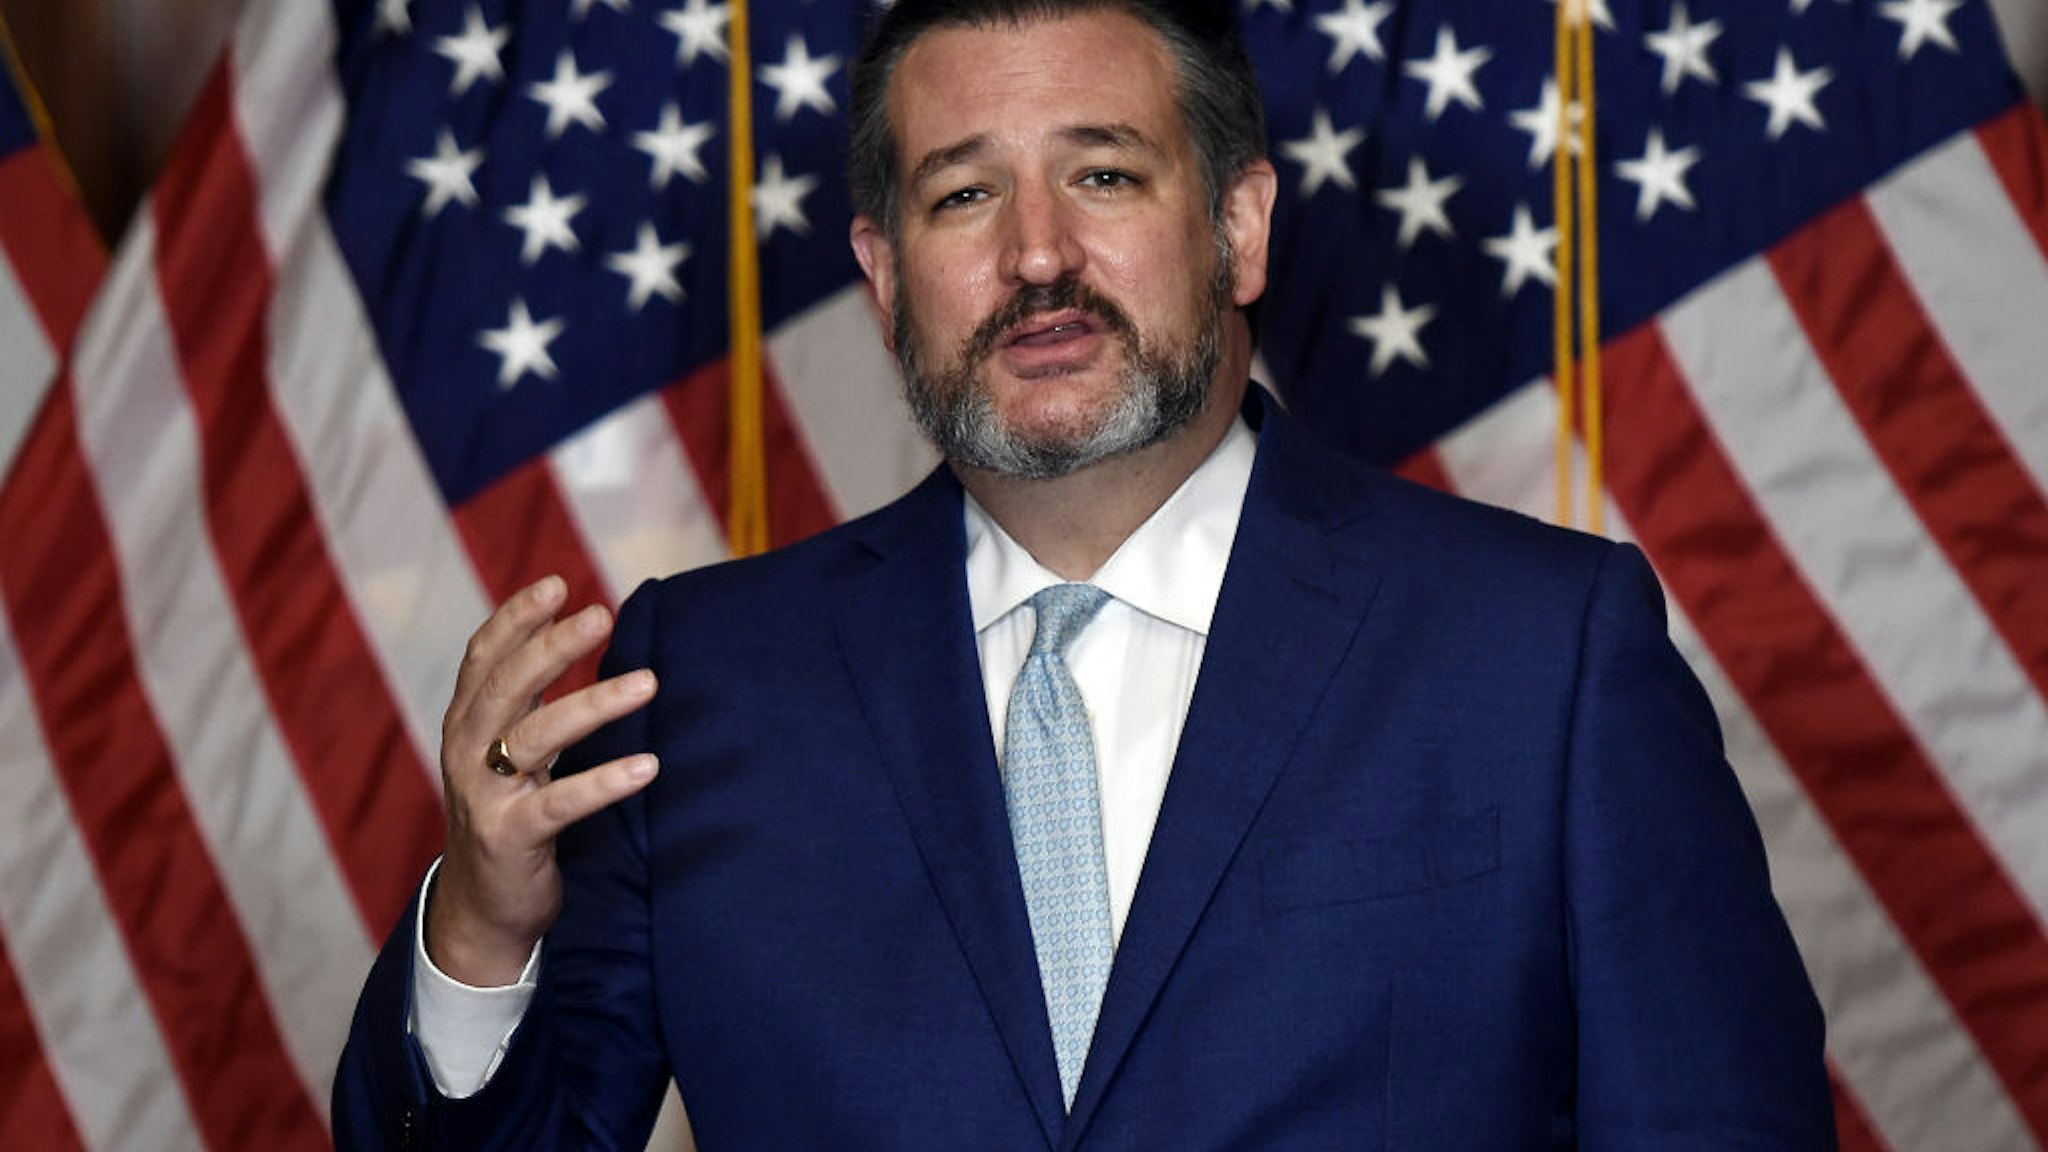 Senator Ted Cruz, a Republican from Texas, speaks during a news conference at the U.S. Capitol in Washington, D.C., U.S., on Monday, Oct. 26, 2020.